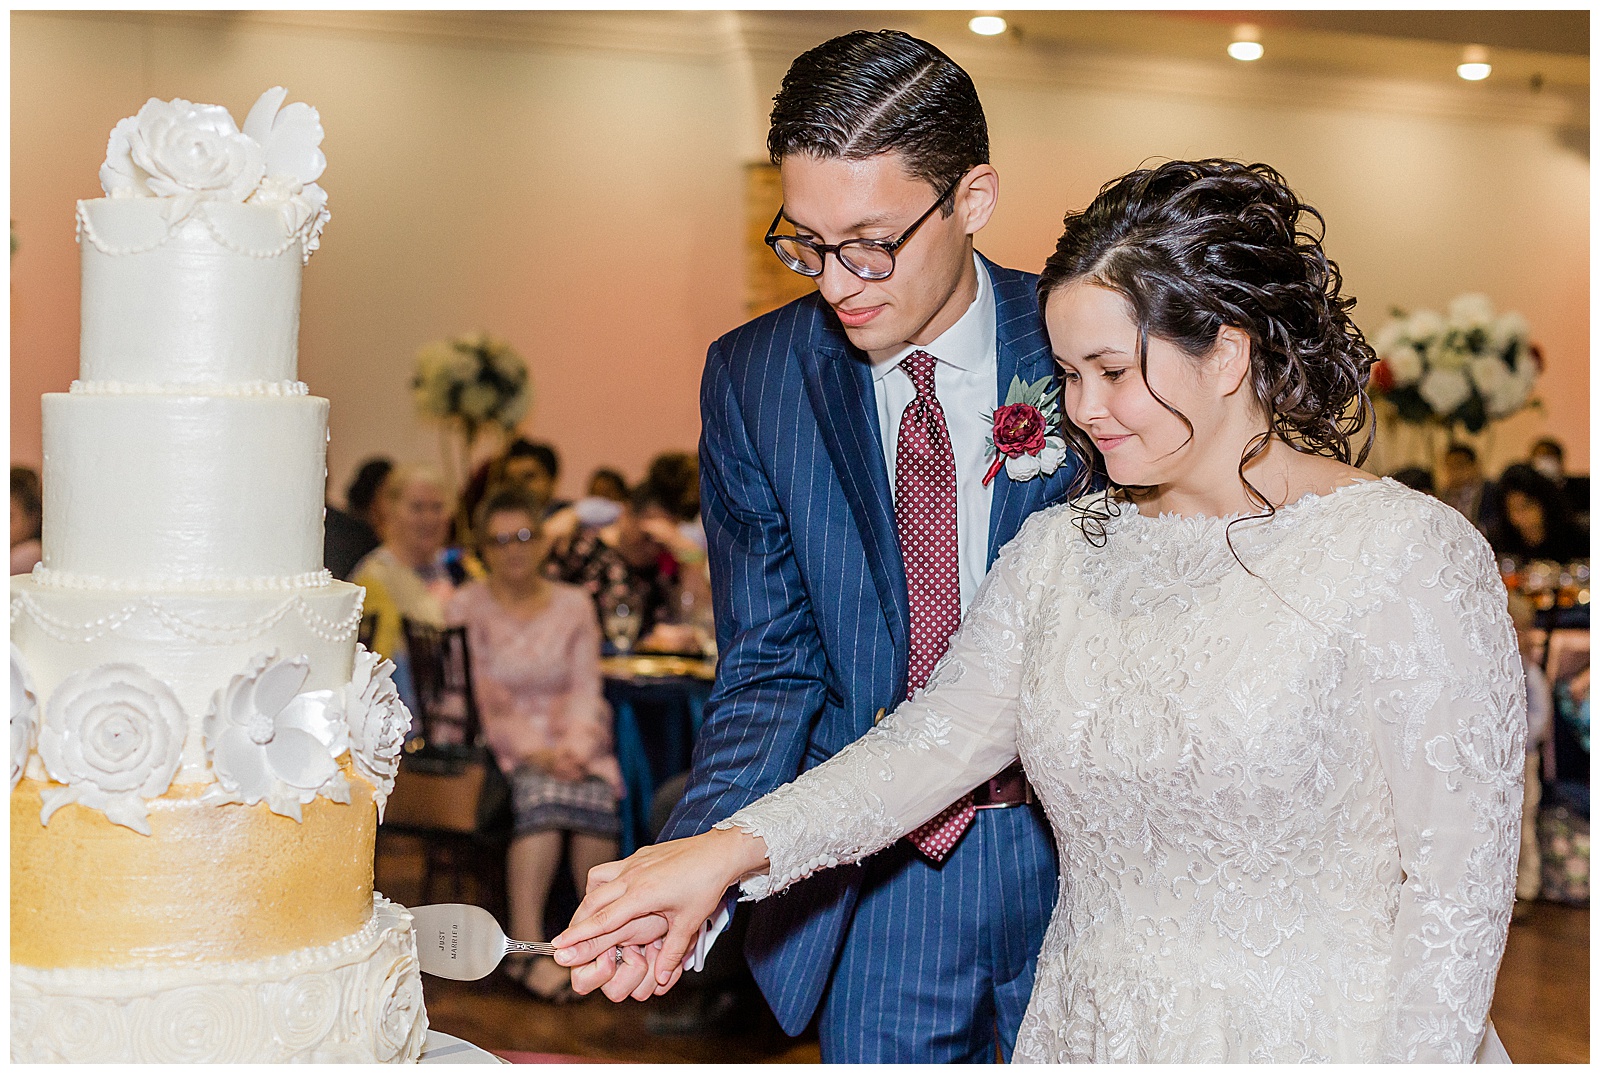 Bride and Groom cutting cake